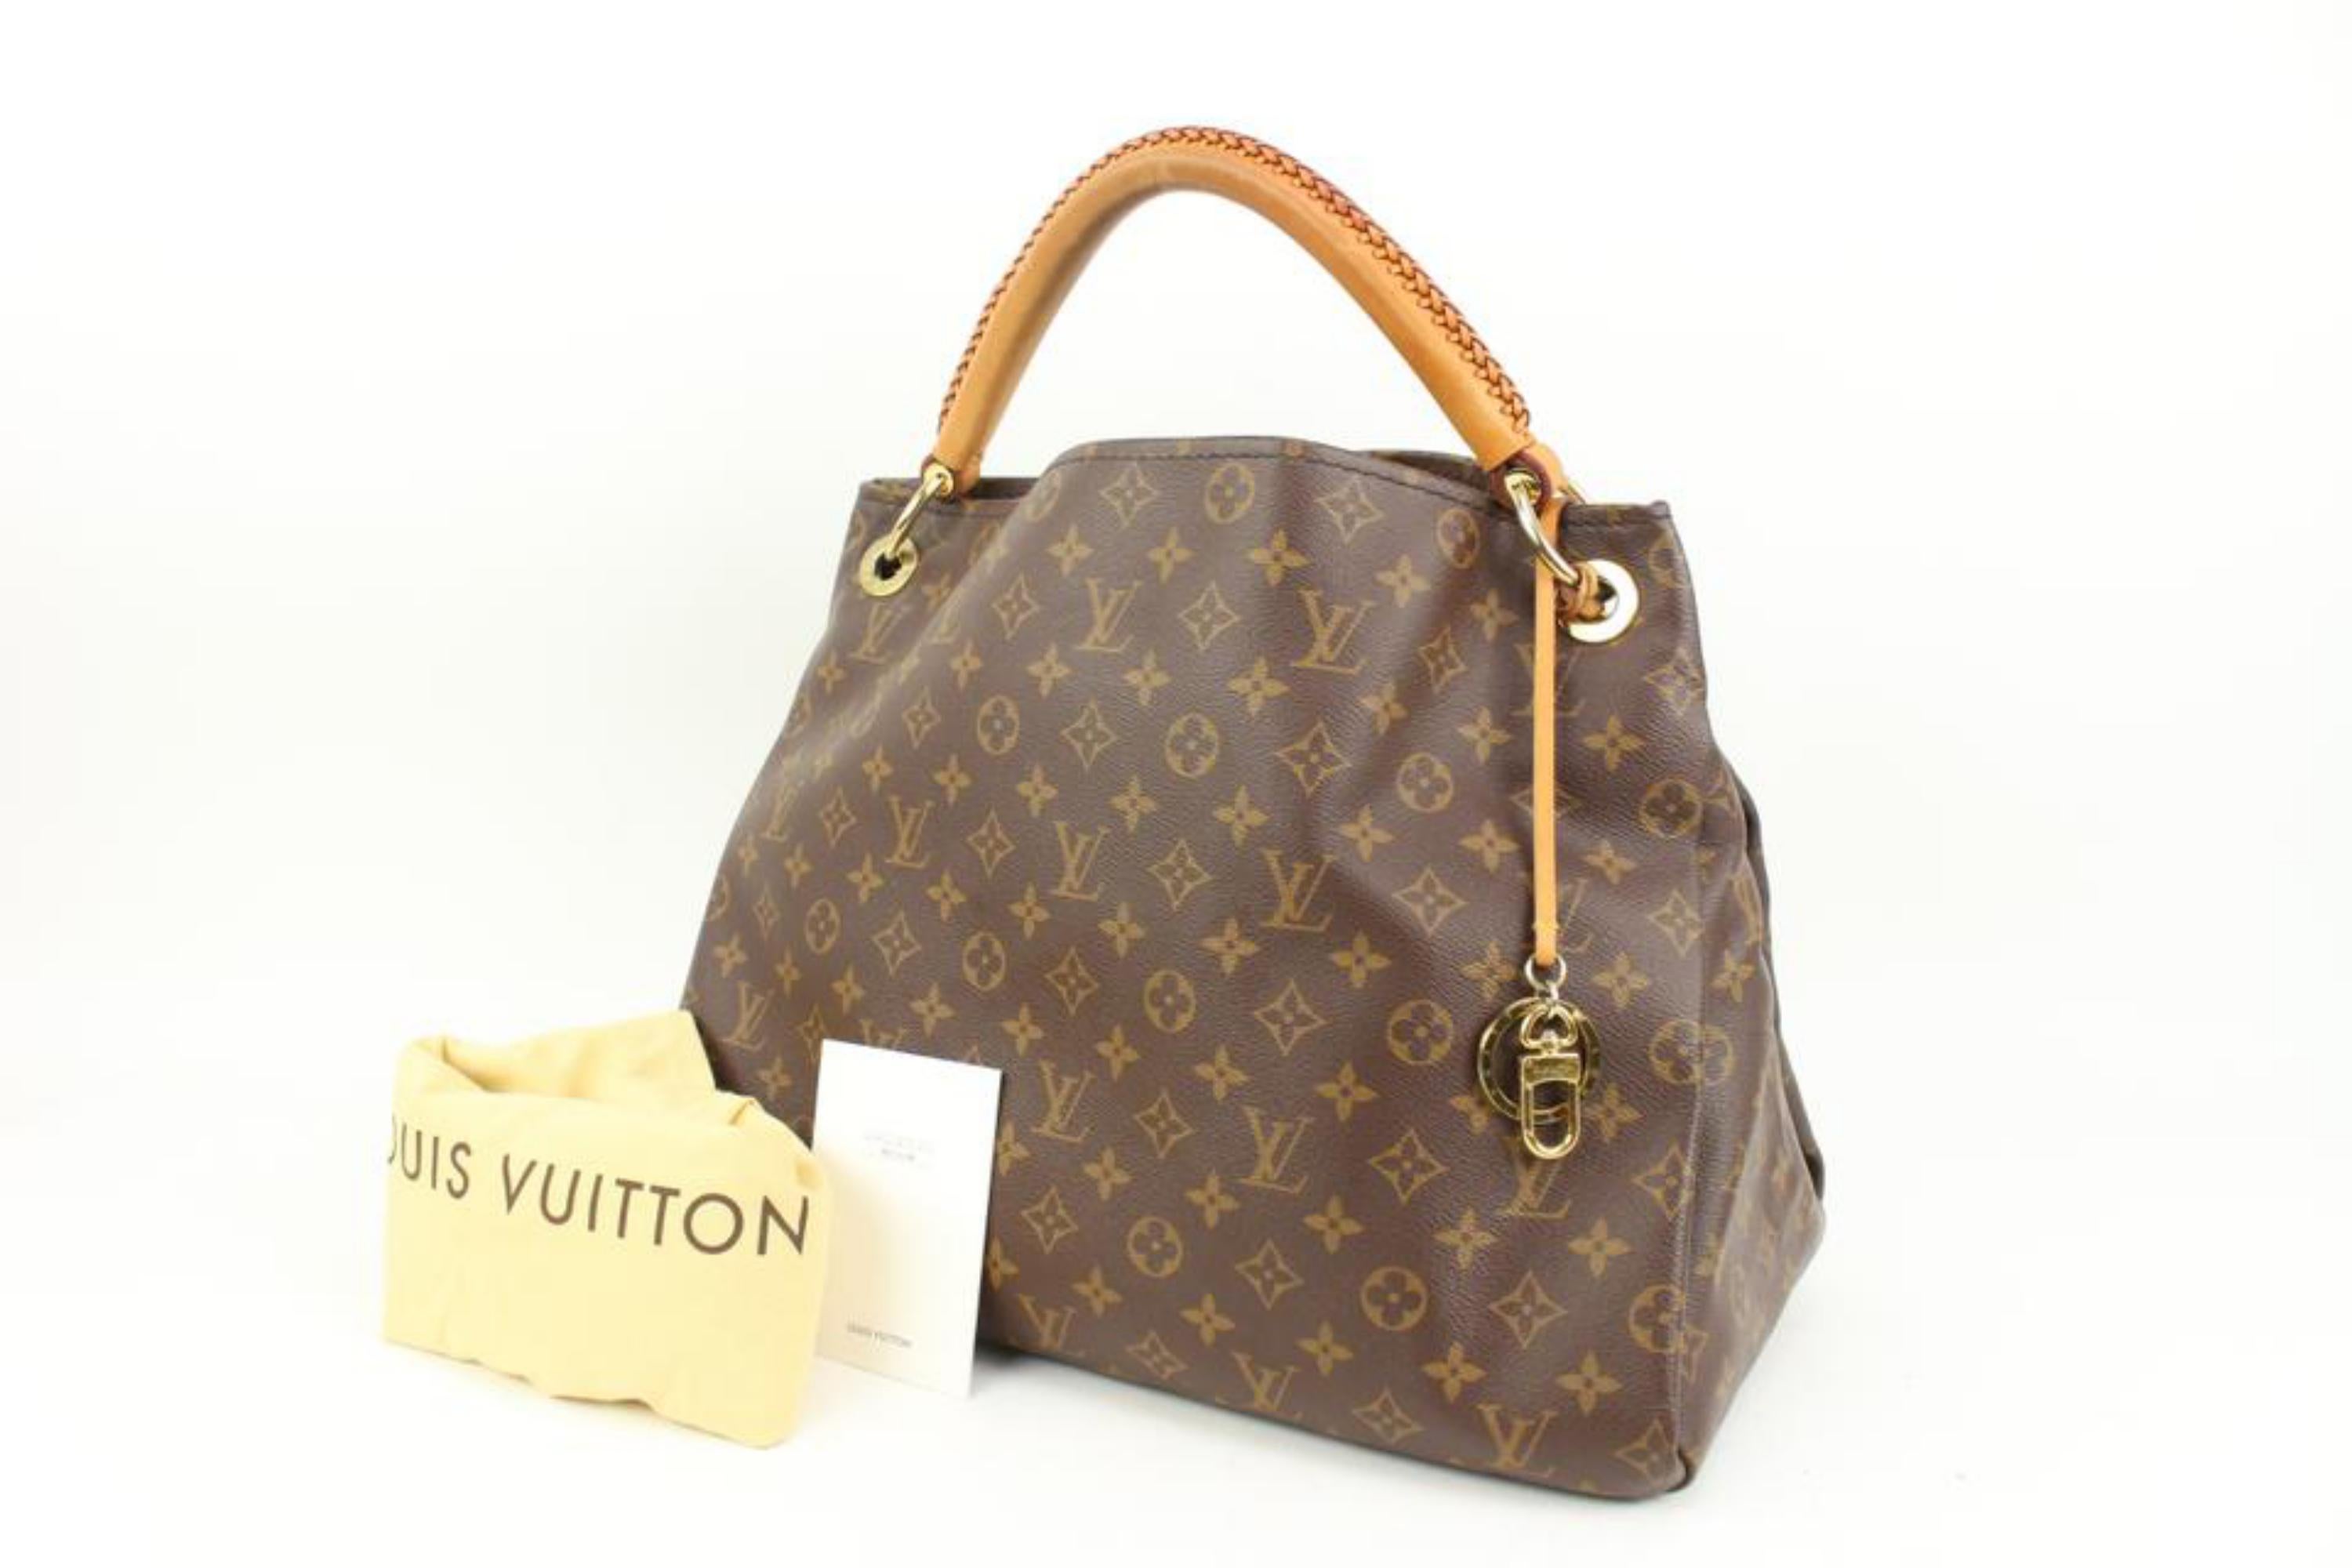 Louis Vuitton Monogram Artsy MM Hobo with Braided Handle 48lk62
Date Code/Serial Number: SD1197
Made In: U.S.A
Measurements: Length:  16.5